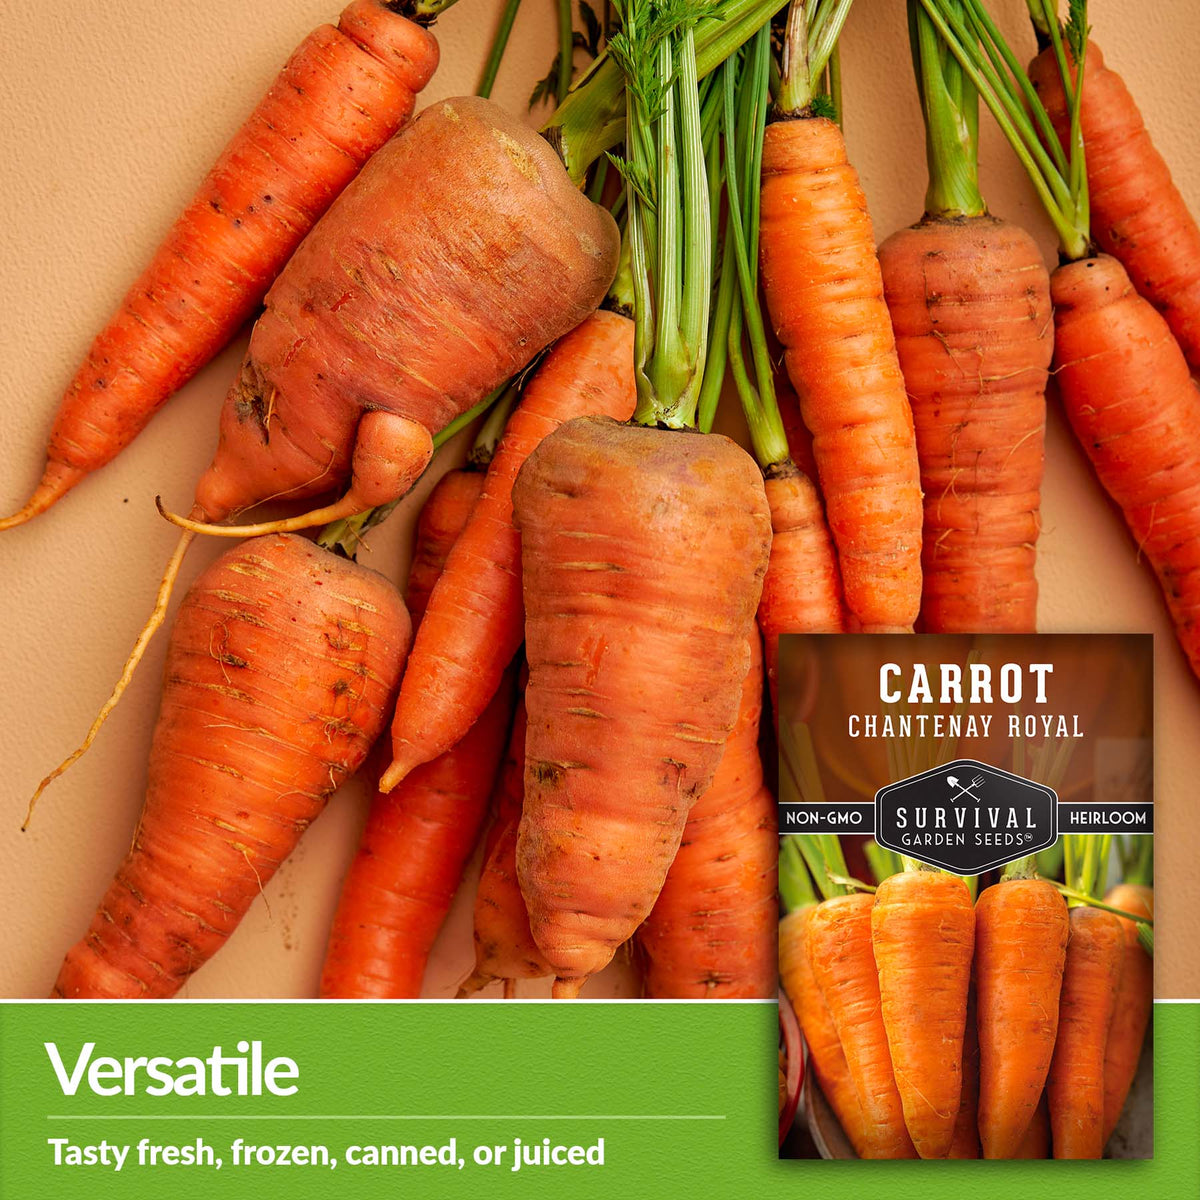 Chantenay Royal Carrots are versatile and can be eaten fresh, frozen, canned or juiced